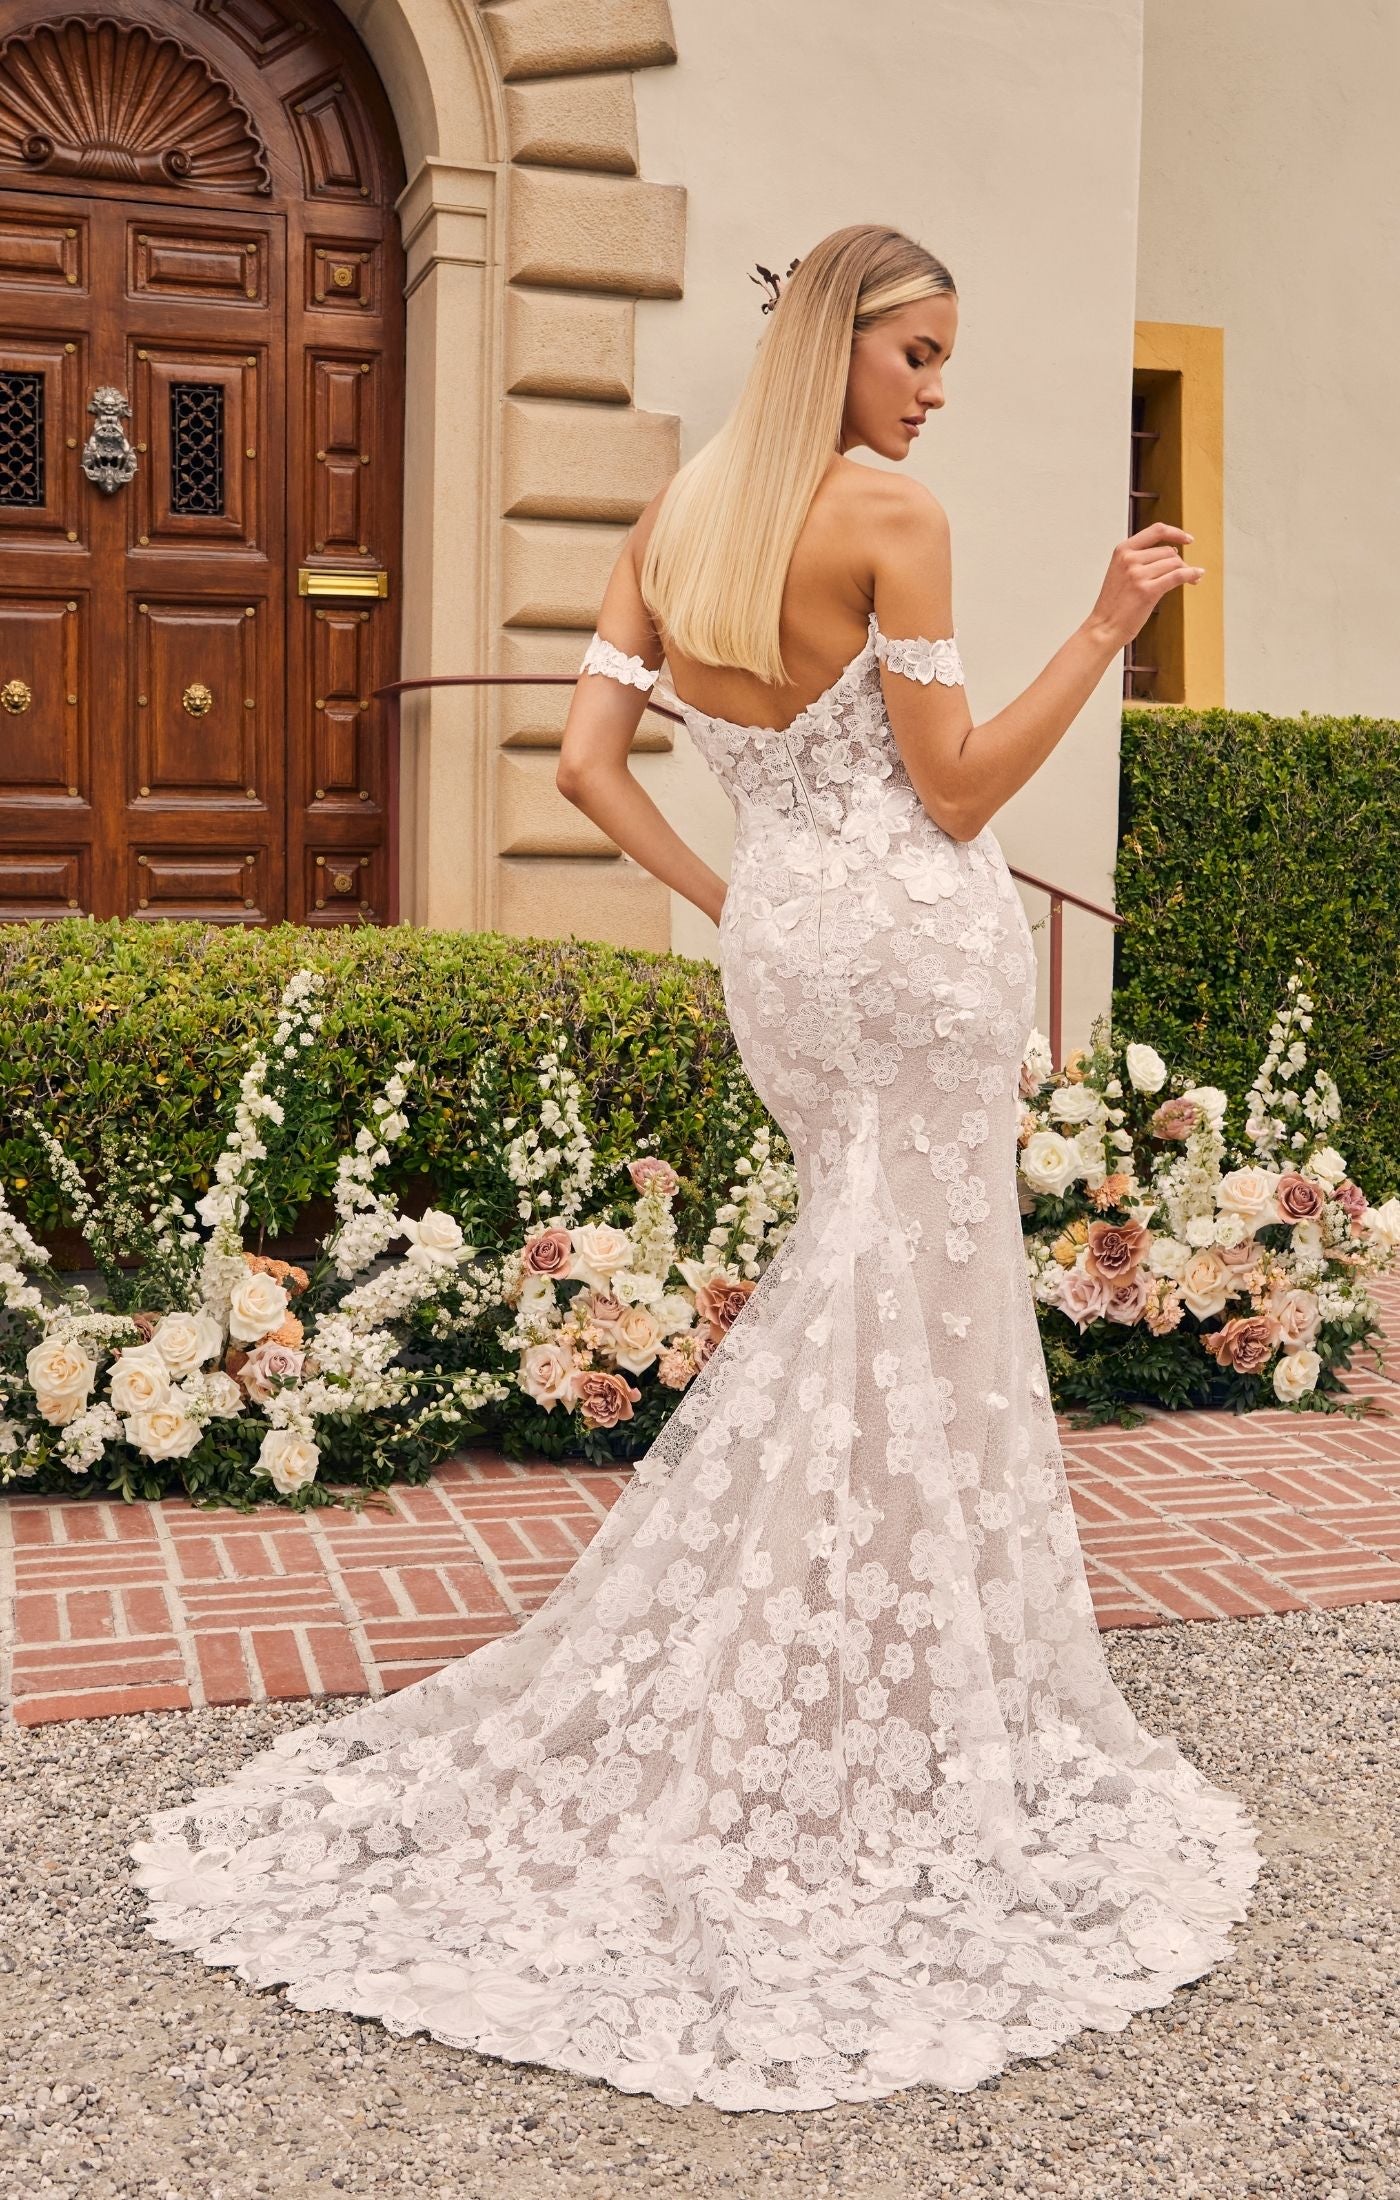 Casablanca Bridal 2544 Geneve Fit And Flare Illusion Bodice Off The Shoulder Sweetheart Neckline Floral Lace Appliques Wedding Gown. Classic elegance is created with this fit and flare wedding dress. The alluring illusion bodice features a classic sweetheart neckline and off the shoulder straps. Adorned with sequined floral lace appliques over a lace underlay for a timeless look. A scalloped lace hem continues around to create a 62” train that extends past the comfortable stretch lining